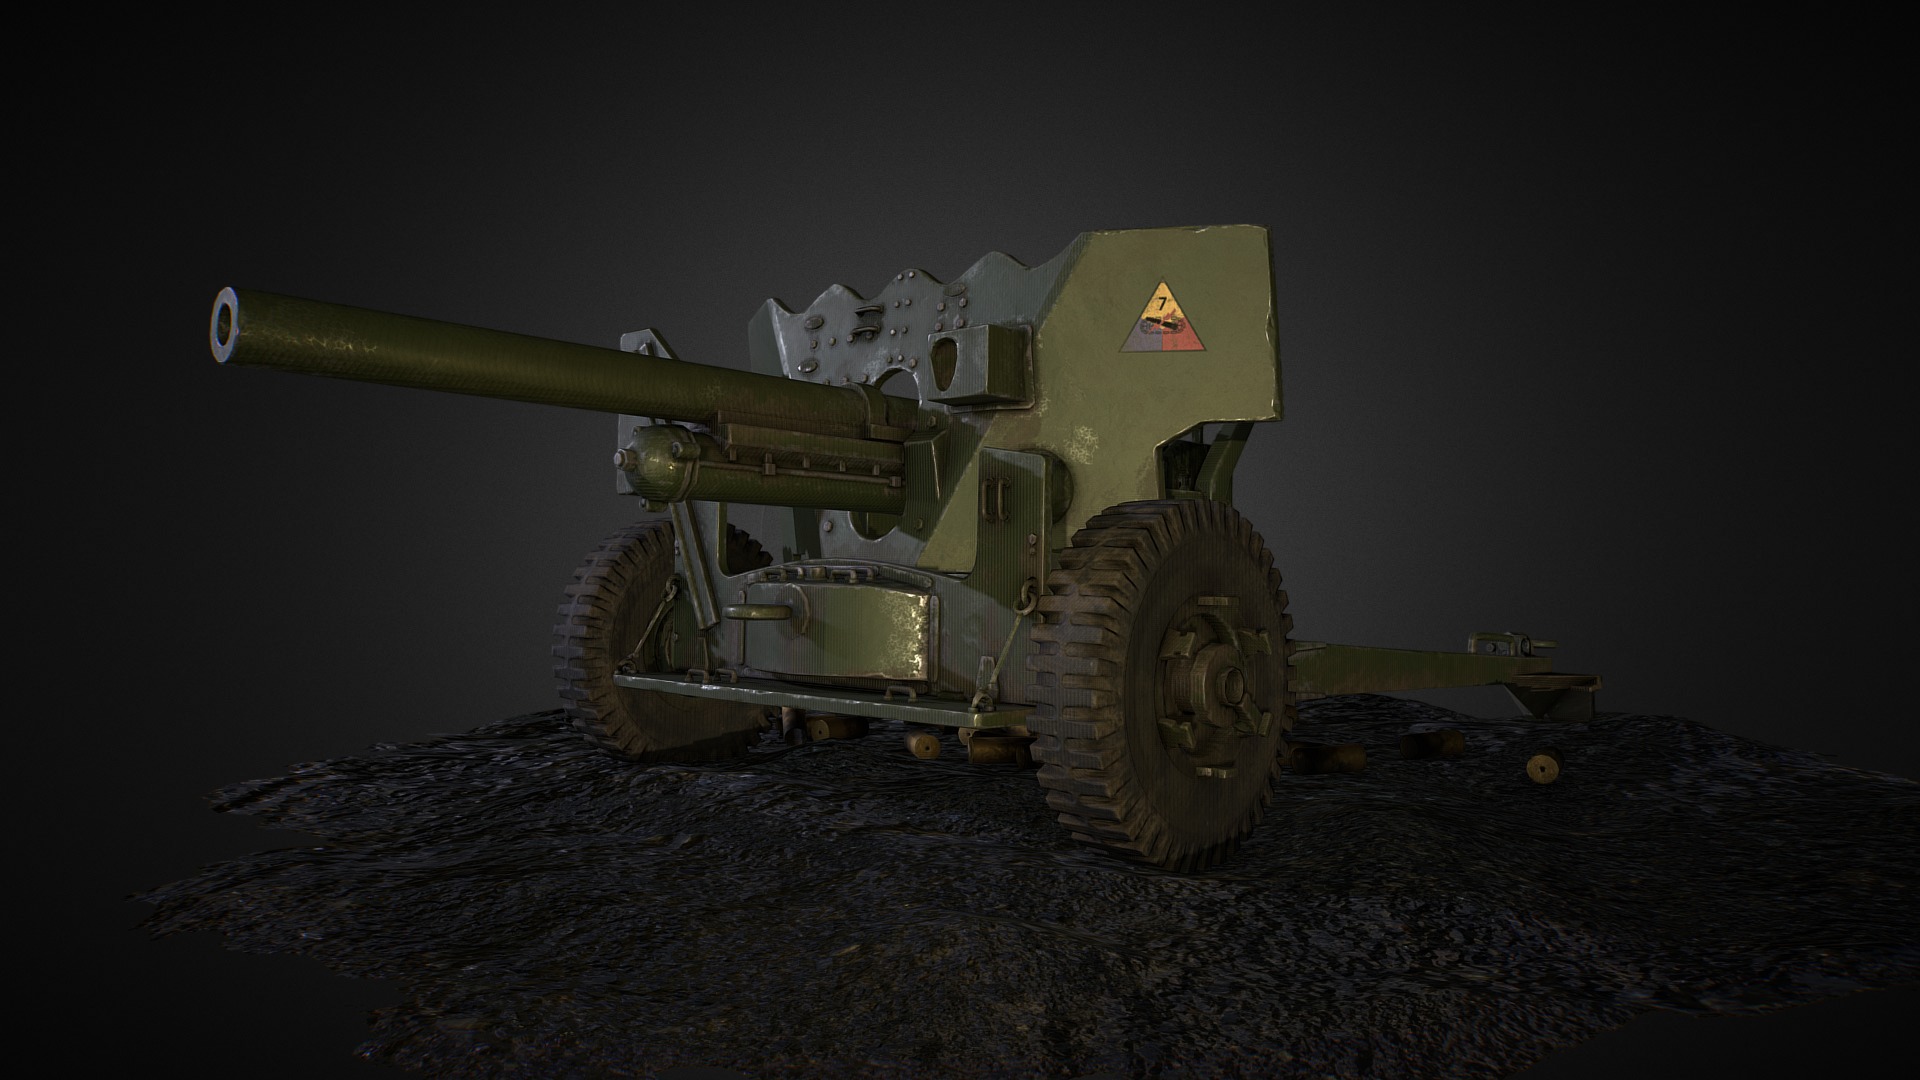 I made this model for featured game called Hell Let Loose. See more: https://www.hellletloose.com/ 
There was a free base model, so I made a retopology, sculpting and texturing. 

Cannon consist of 21491 tris 3d model